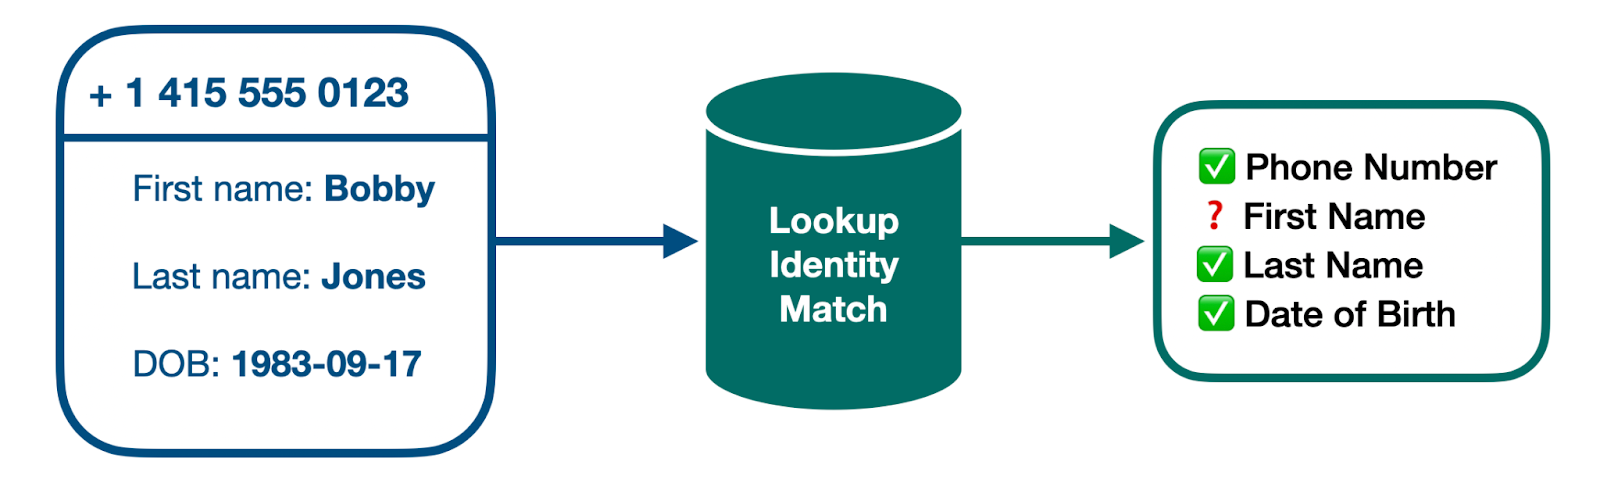 Diagram showing the inputs and outputs of the Lookup Identity Match